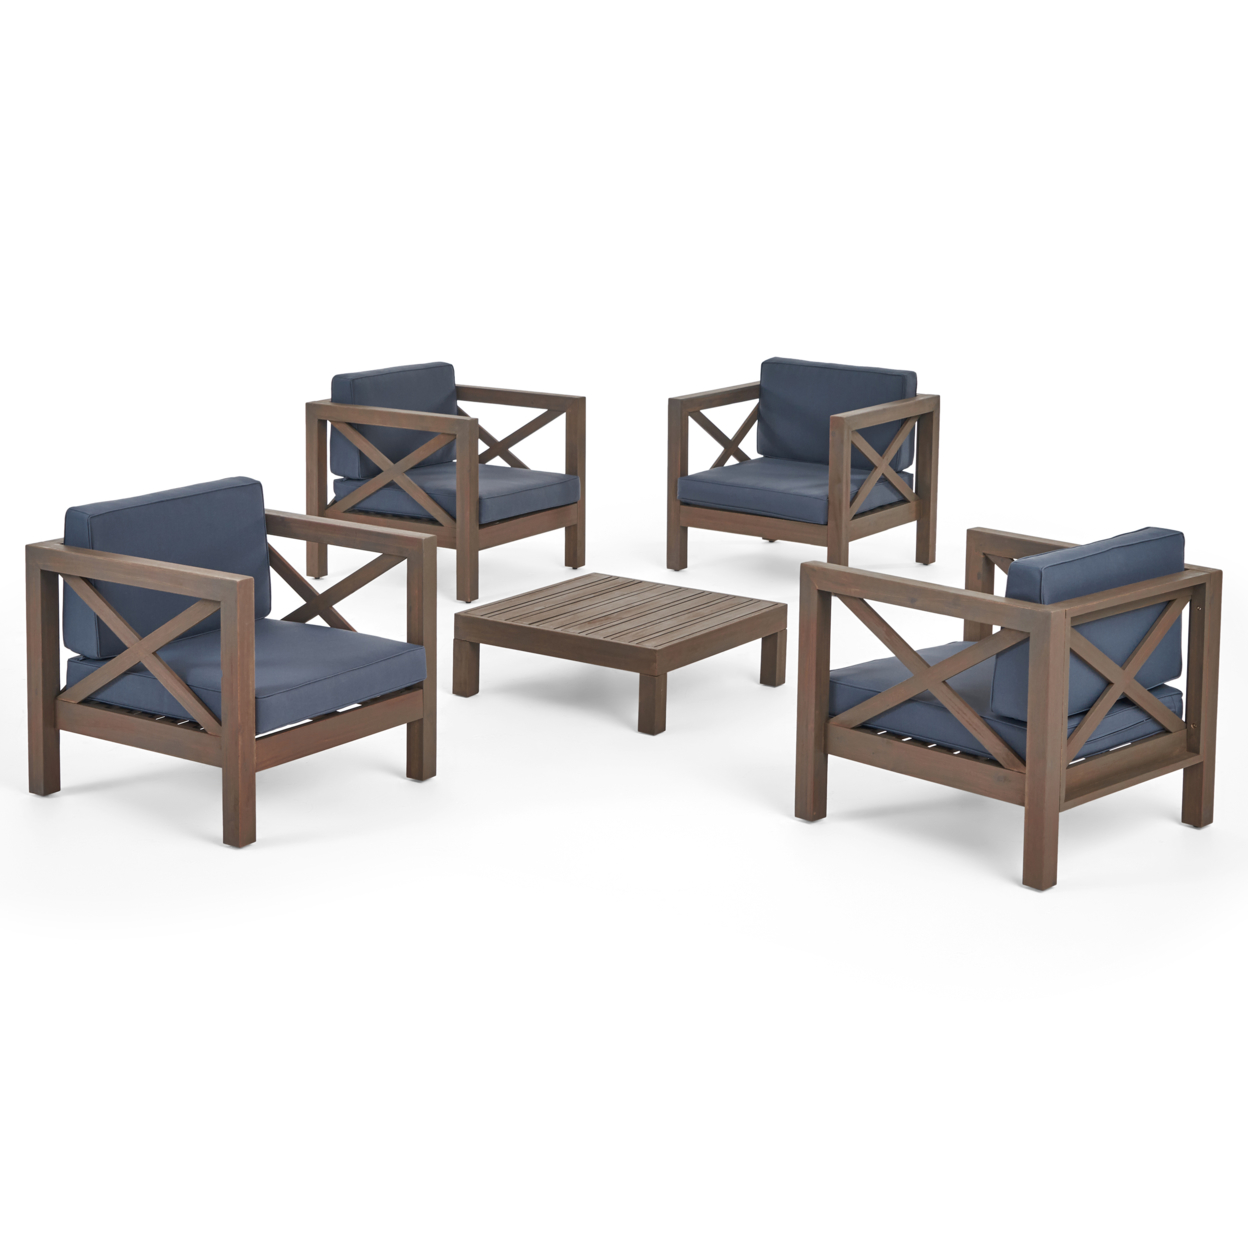 Morgan Outdoor 4 Seater Acacia Wood Club Chair And Coffee Table Set - Teak Finish + Beige